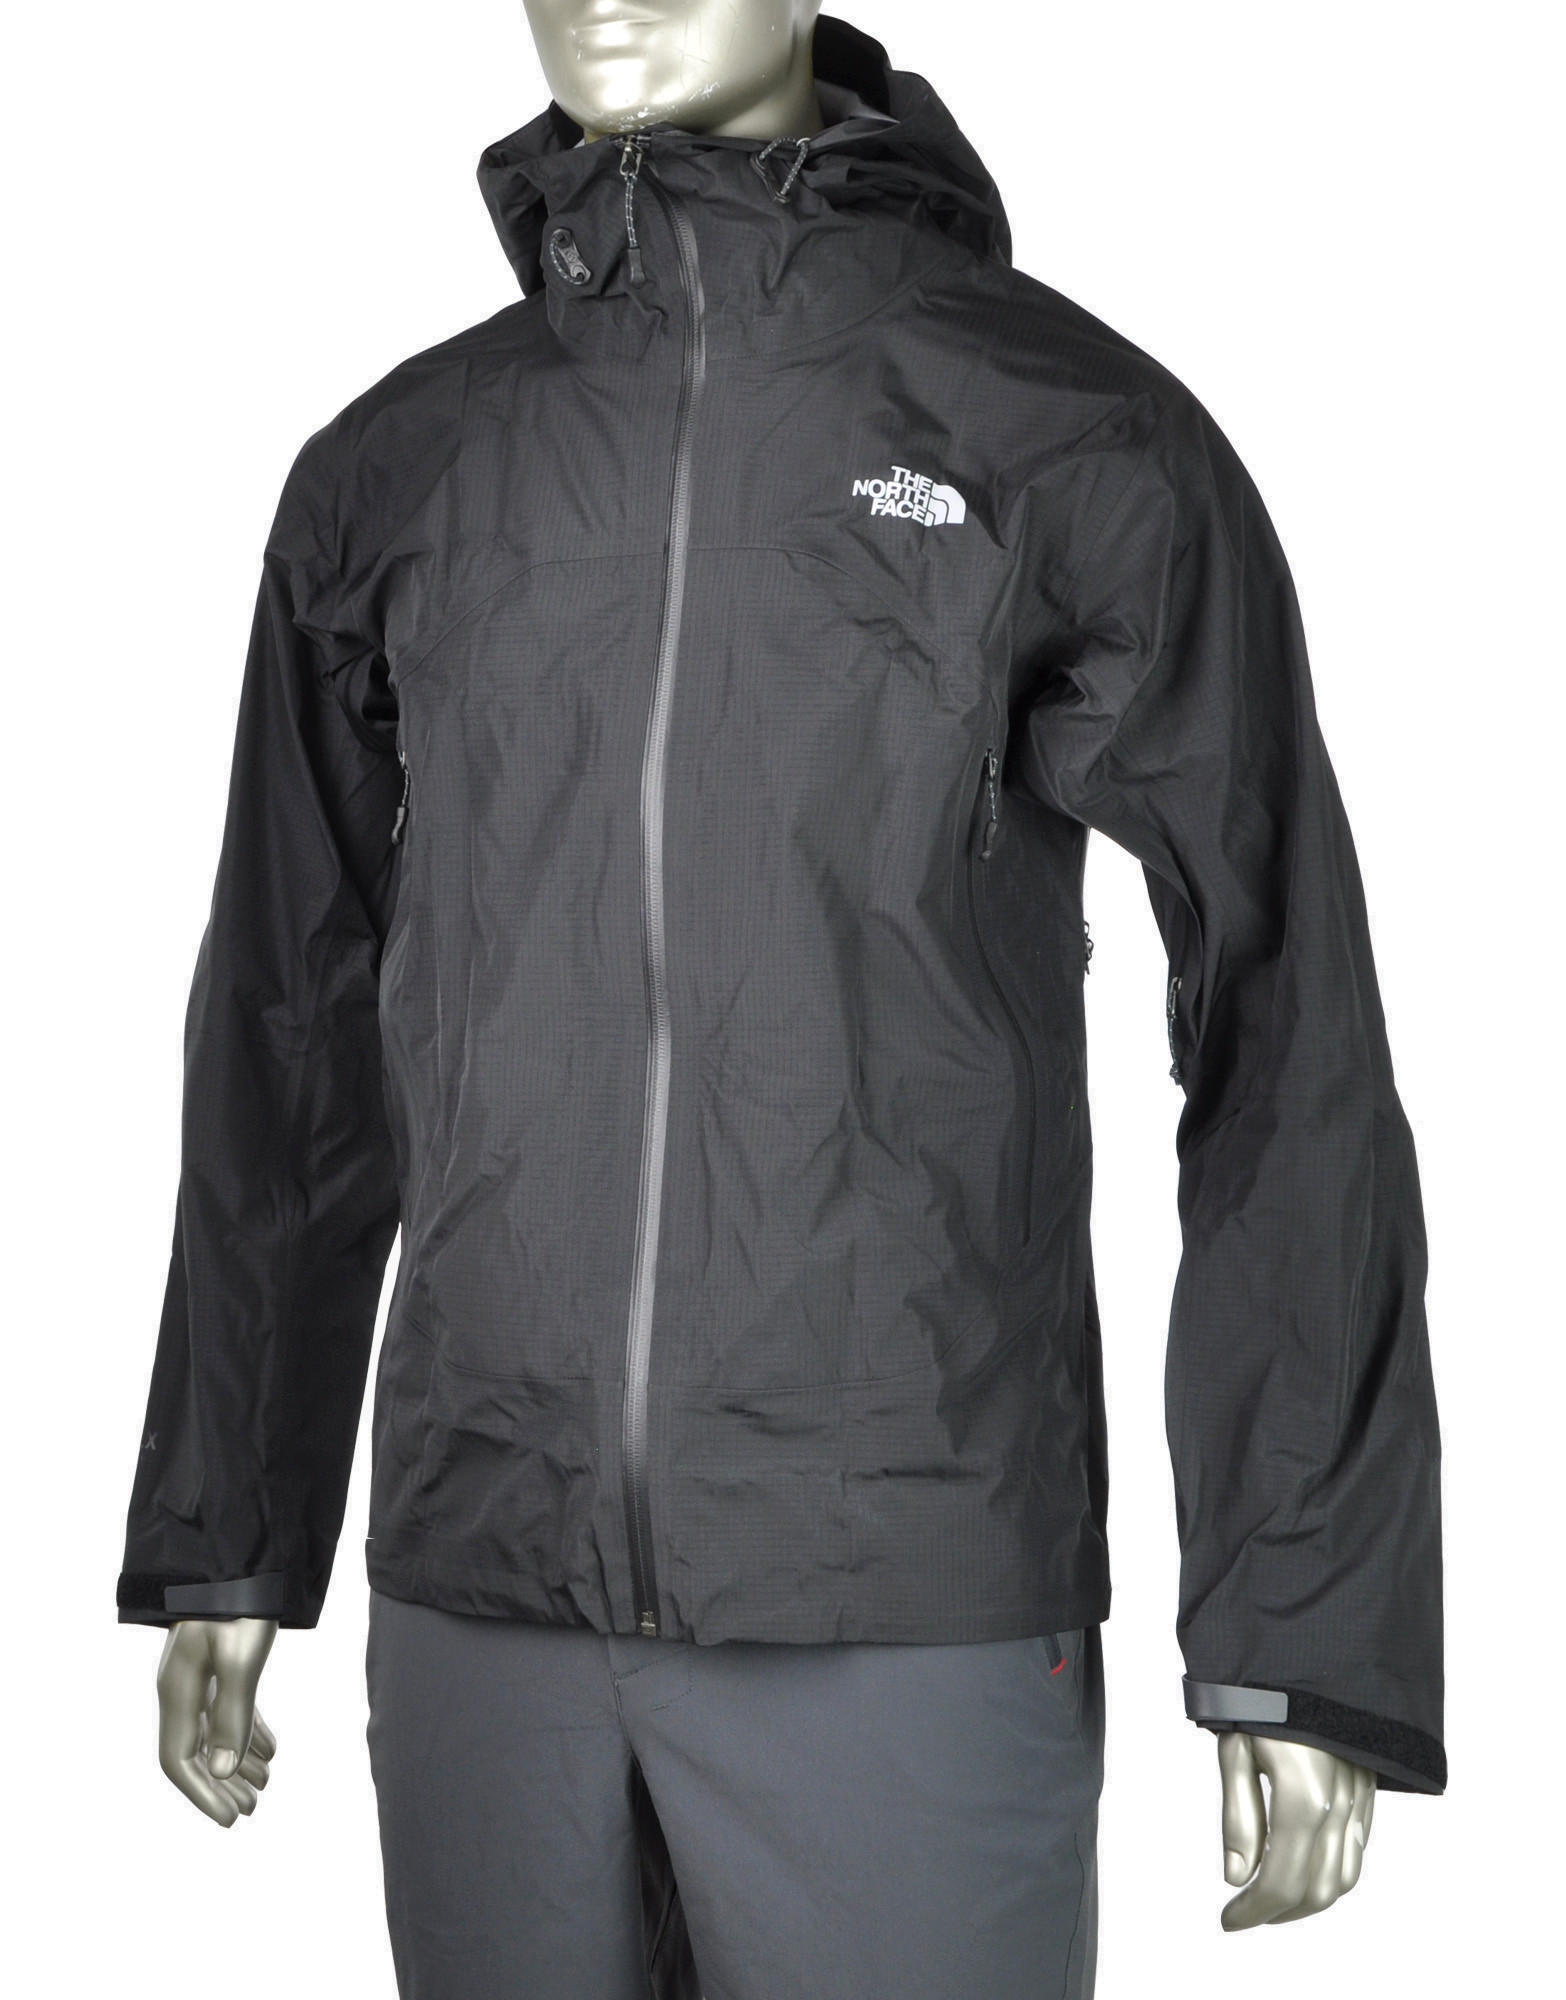 Alpine Project Jacket by The north face 